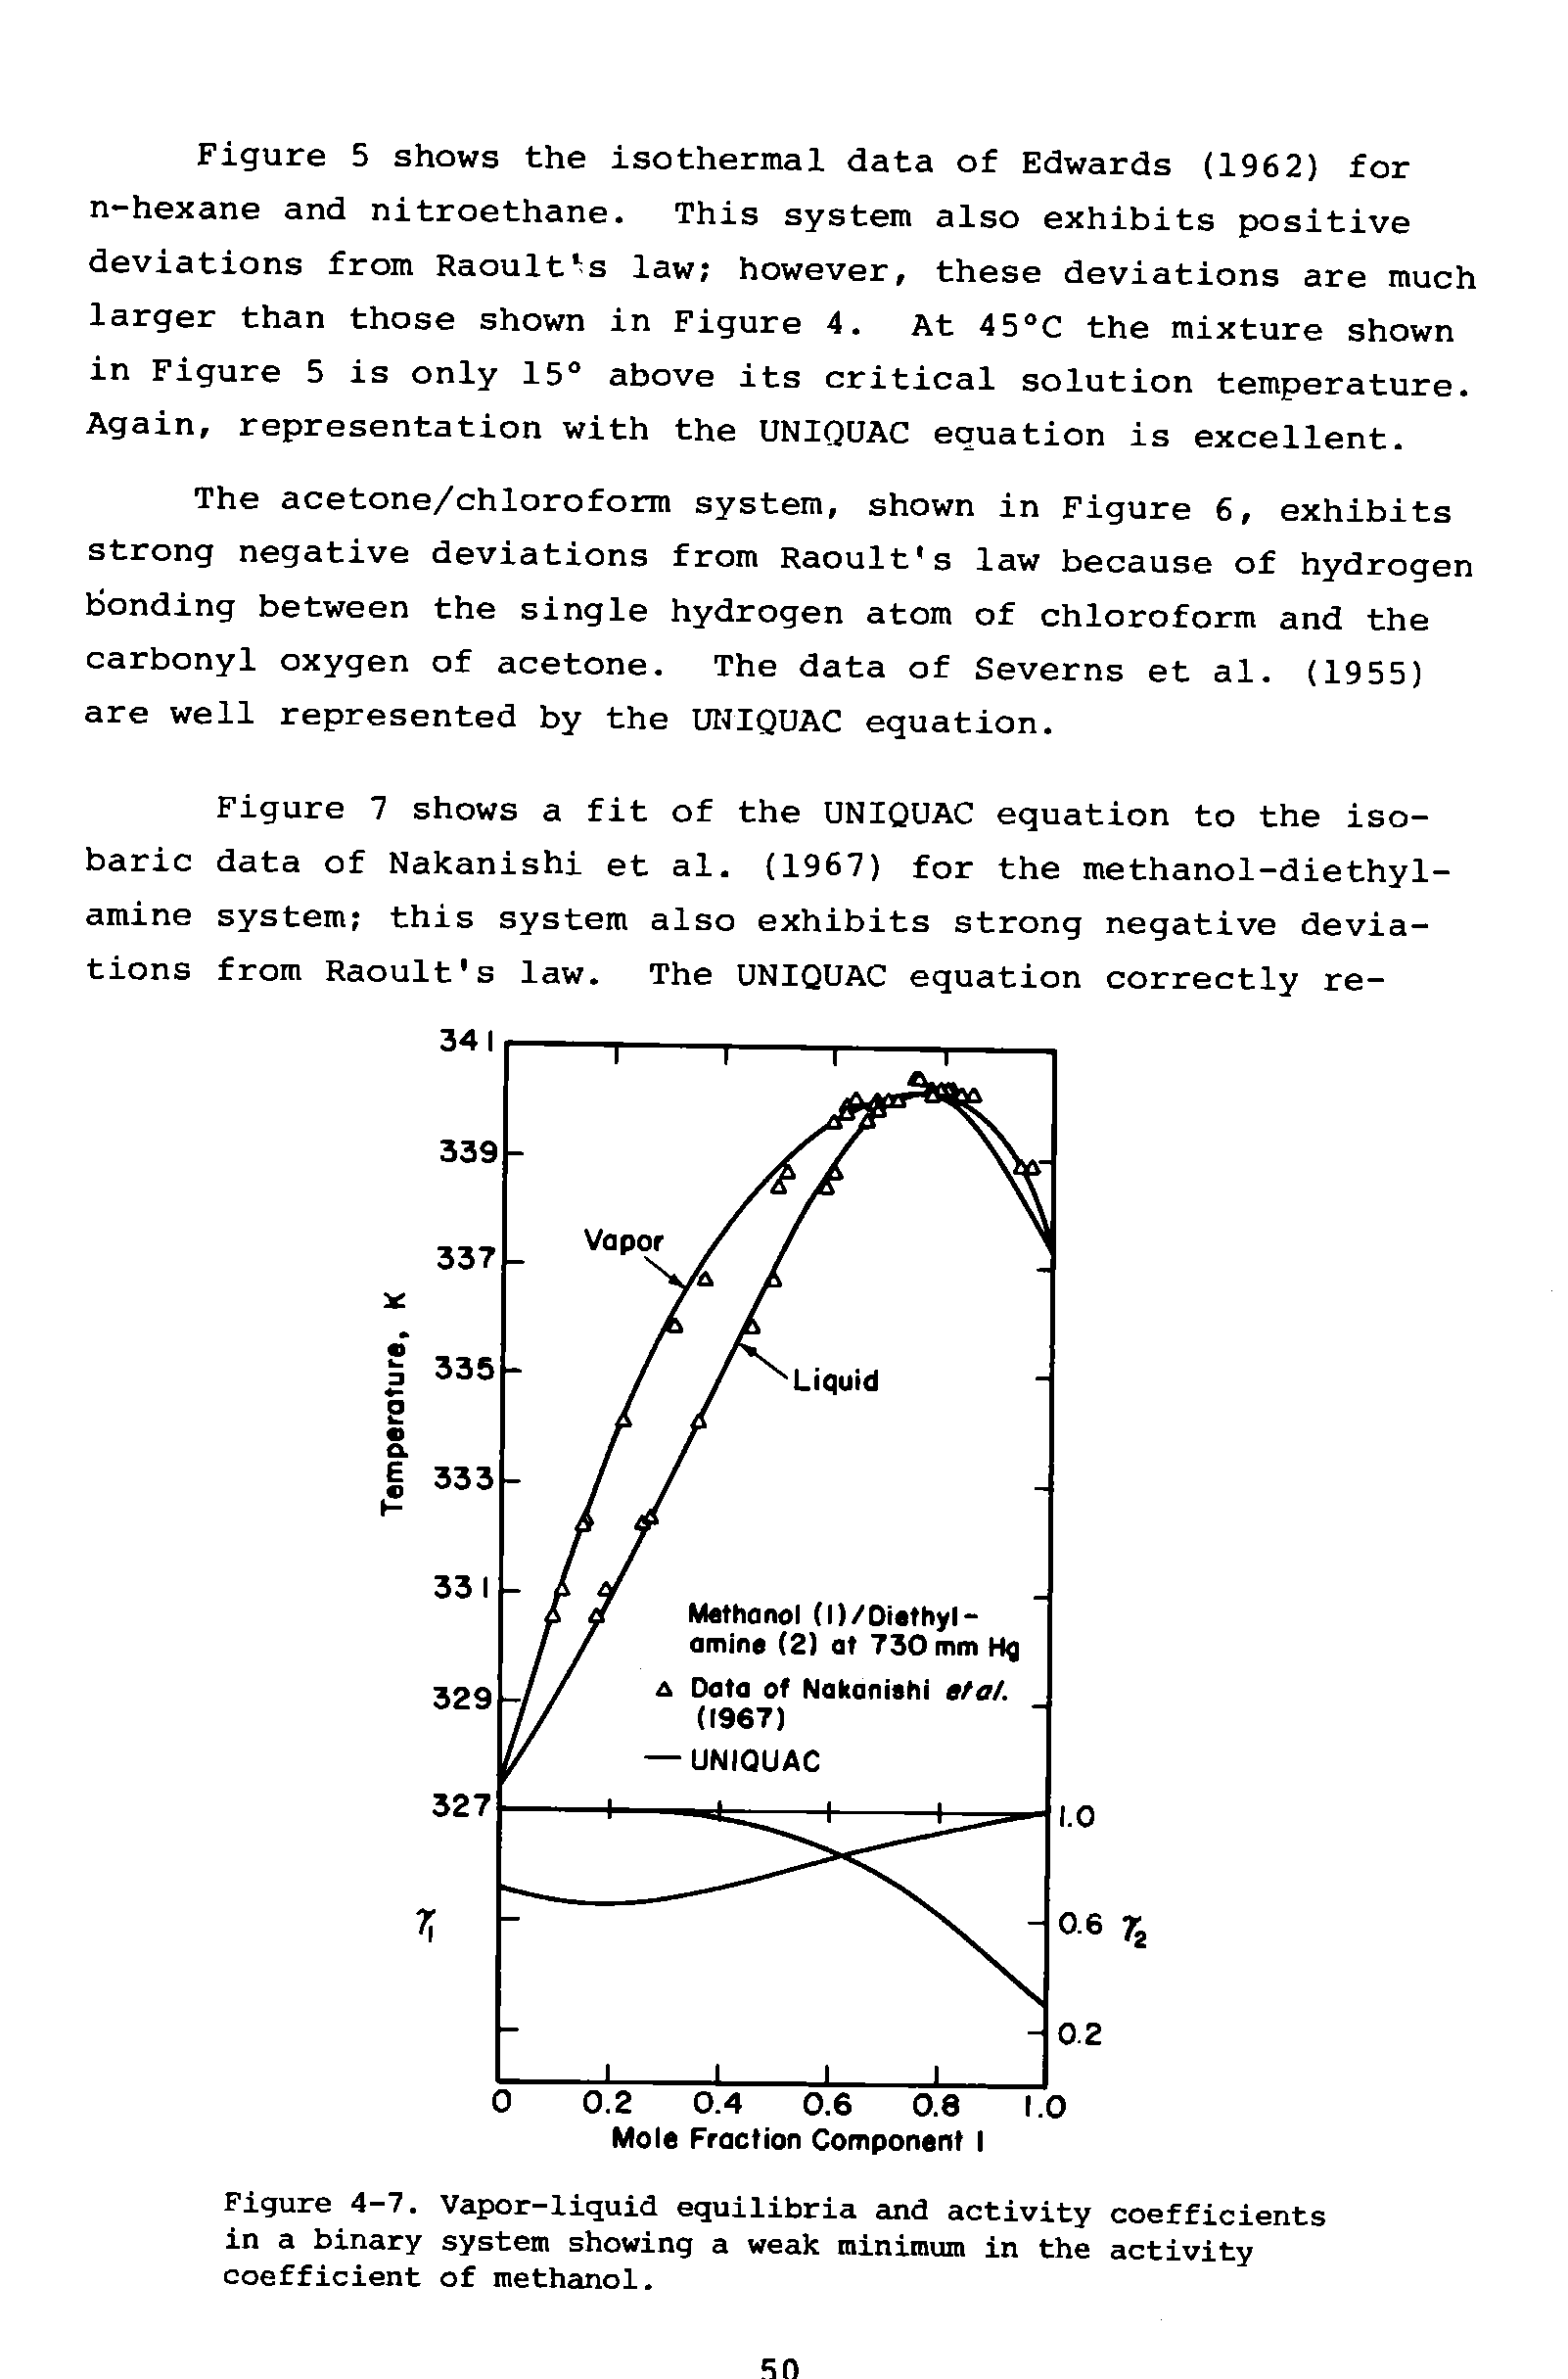 Figure 5 shows the isothermal data of Edwards (1962) for n-hexane and nitroethane. This system also exhibits positive deviations from Raoult s law however, these deviations are much larger than those shown in Figure 4. At 45°C the mixture shown in Figure 5 is only 15° above its critical solution temperature. Again, representation with the UNIQUAC equation is excellent.